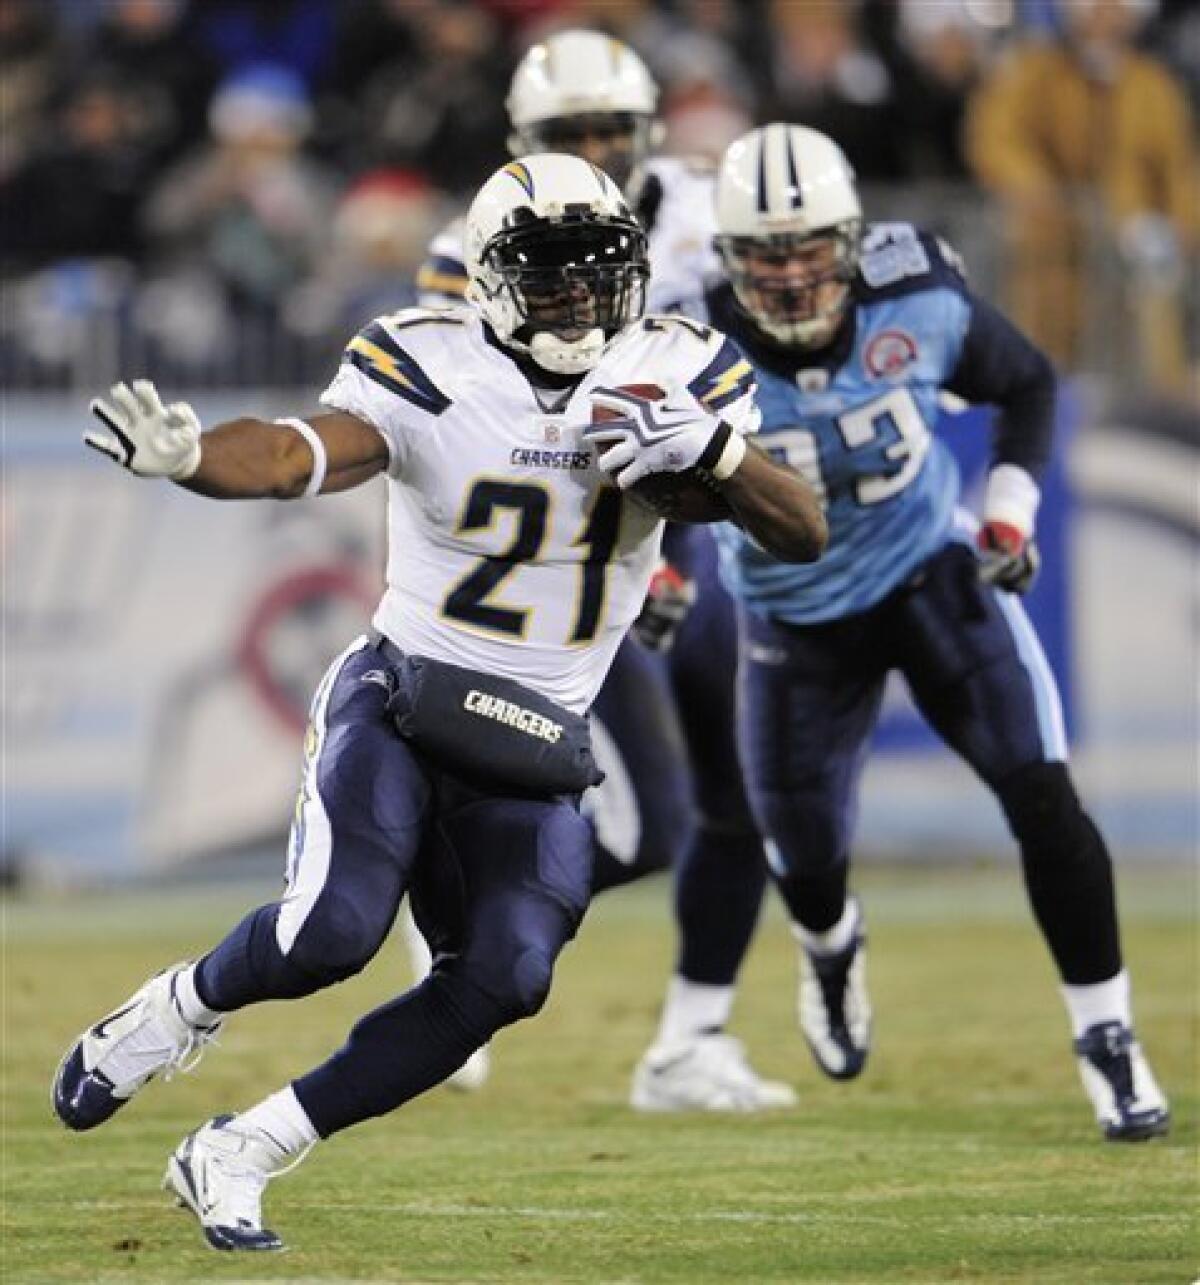 Chargers secure 1st-round bye, beat Titans 42-17 - The San Diego